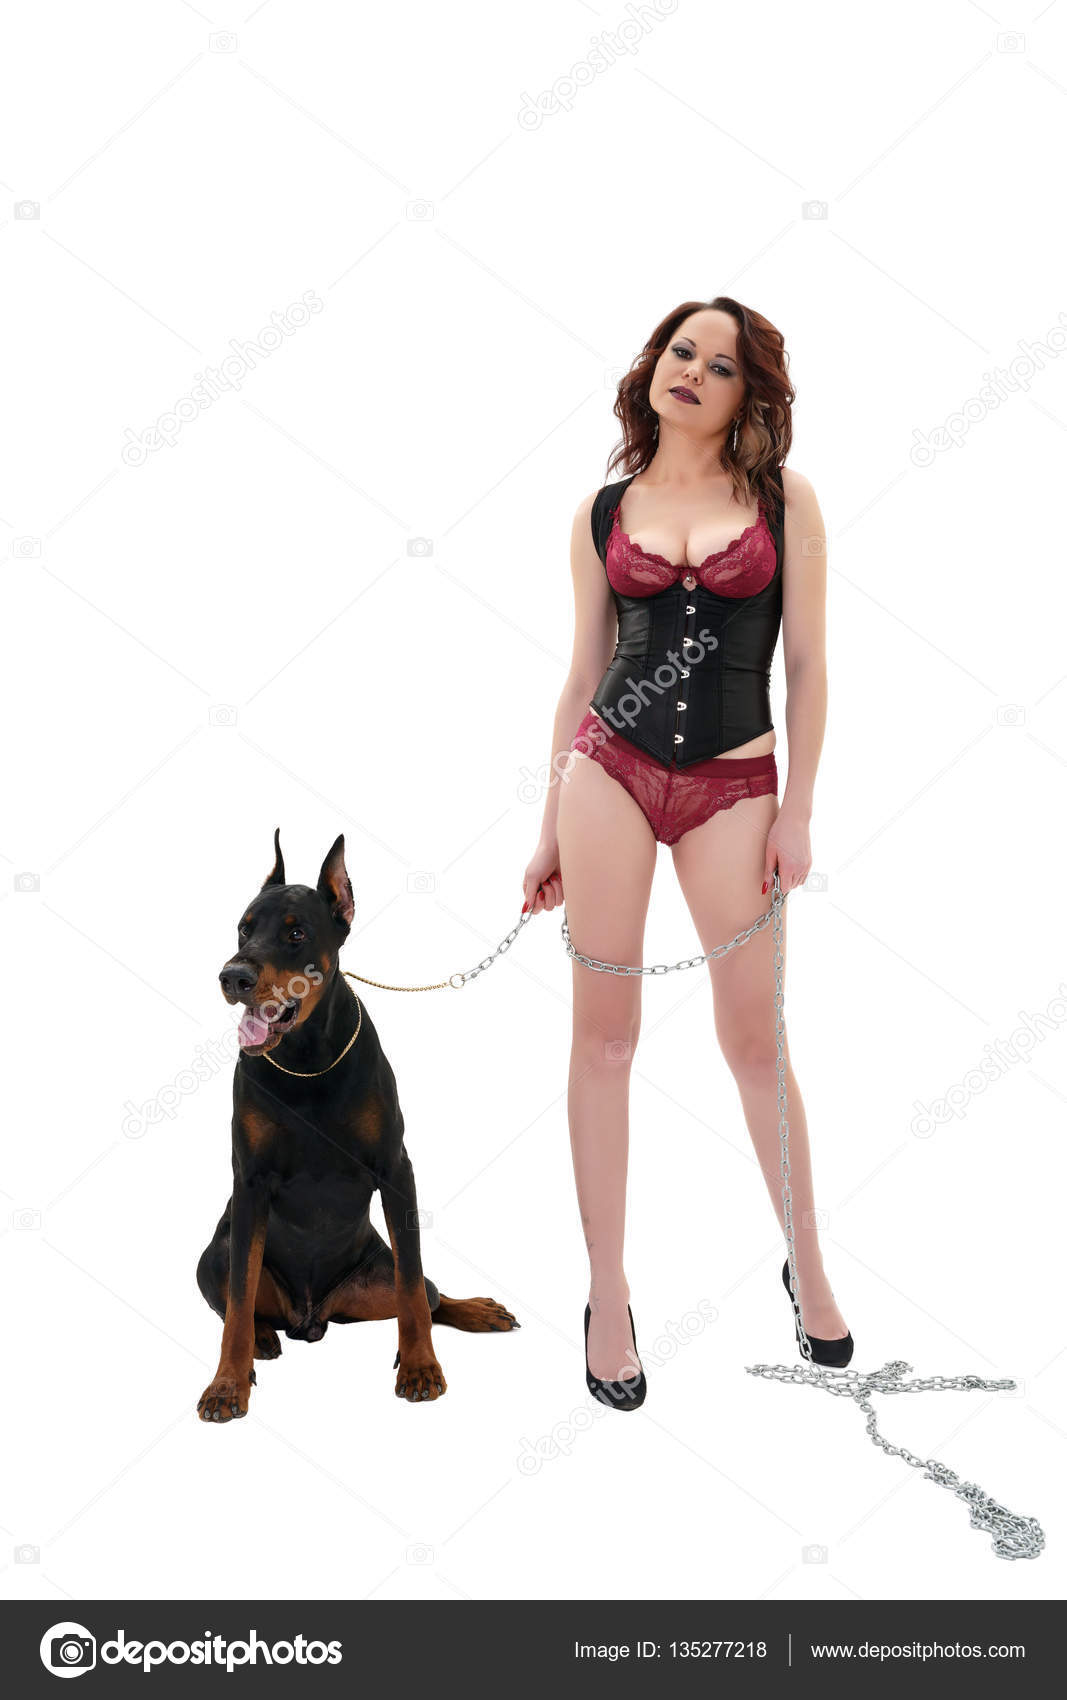 Dog woman in lingerie erotic